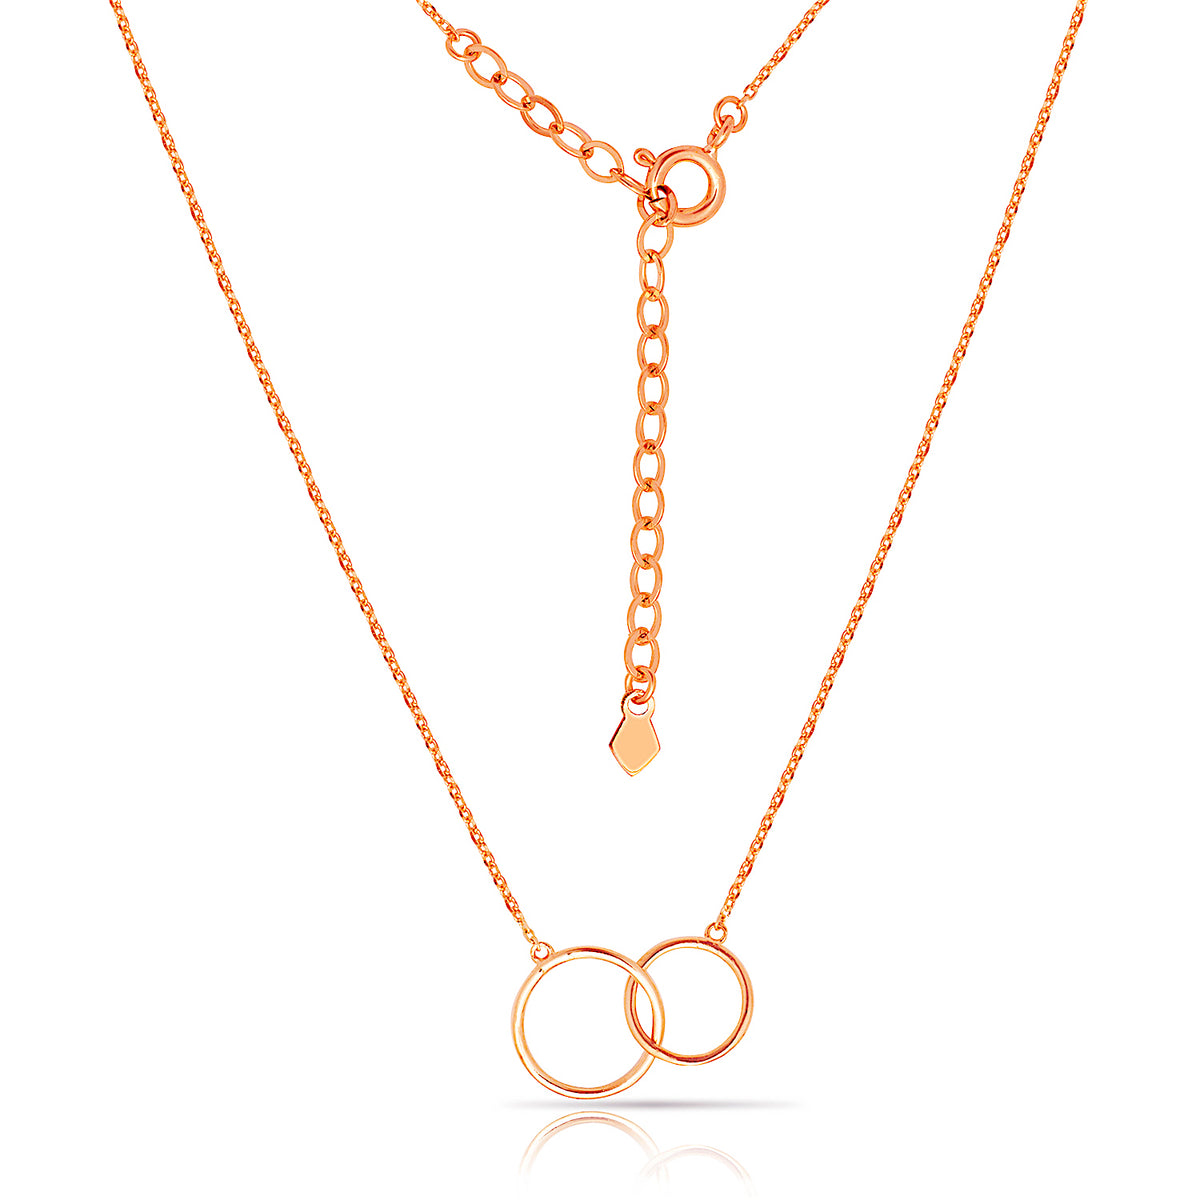 Duo necklace